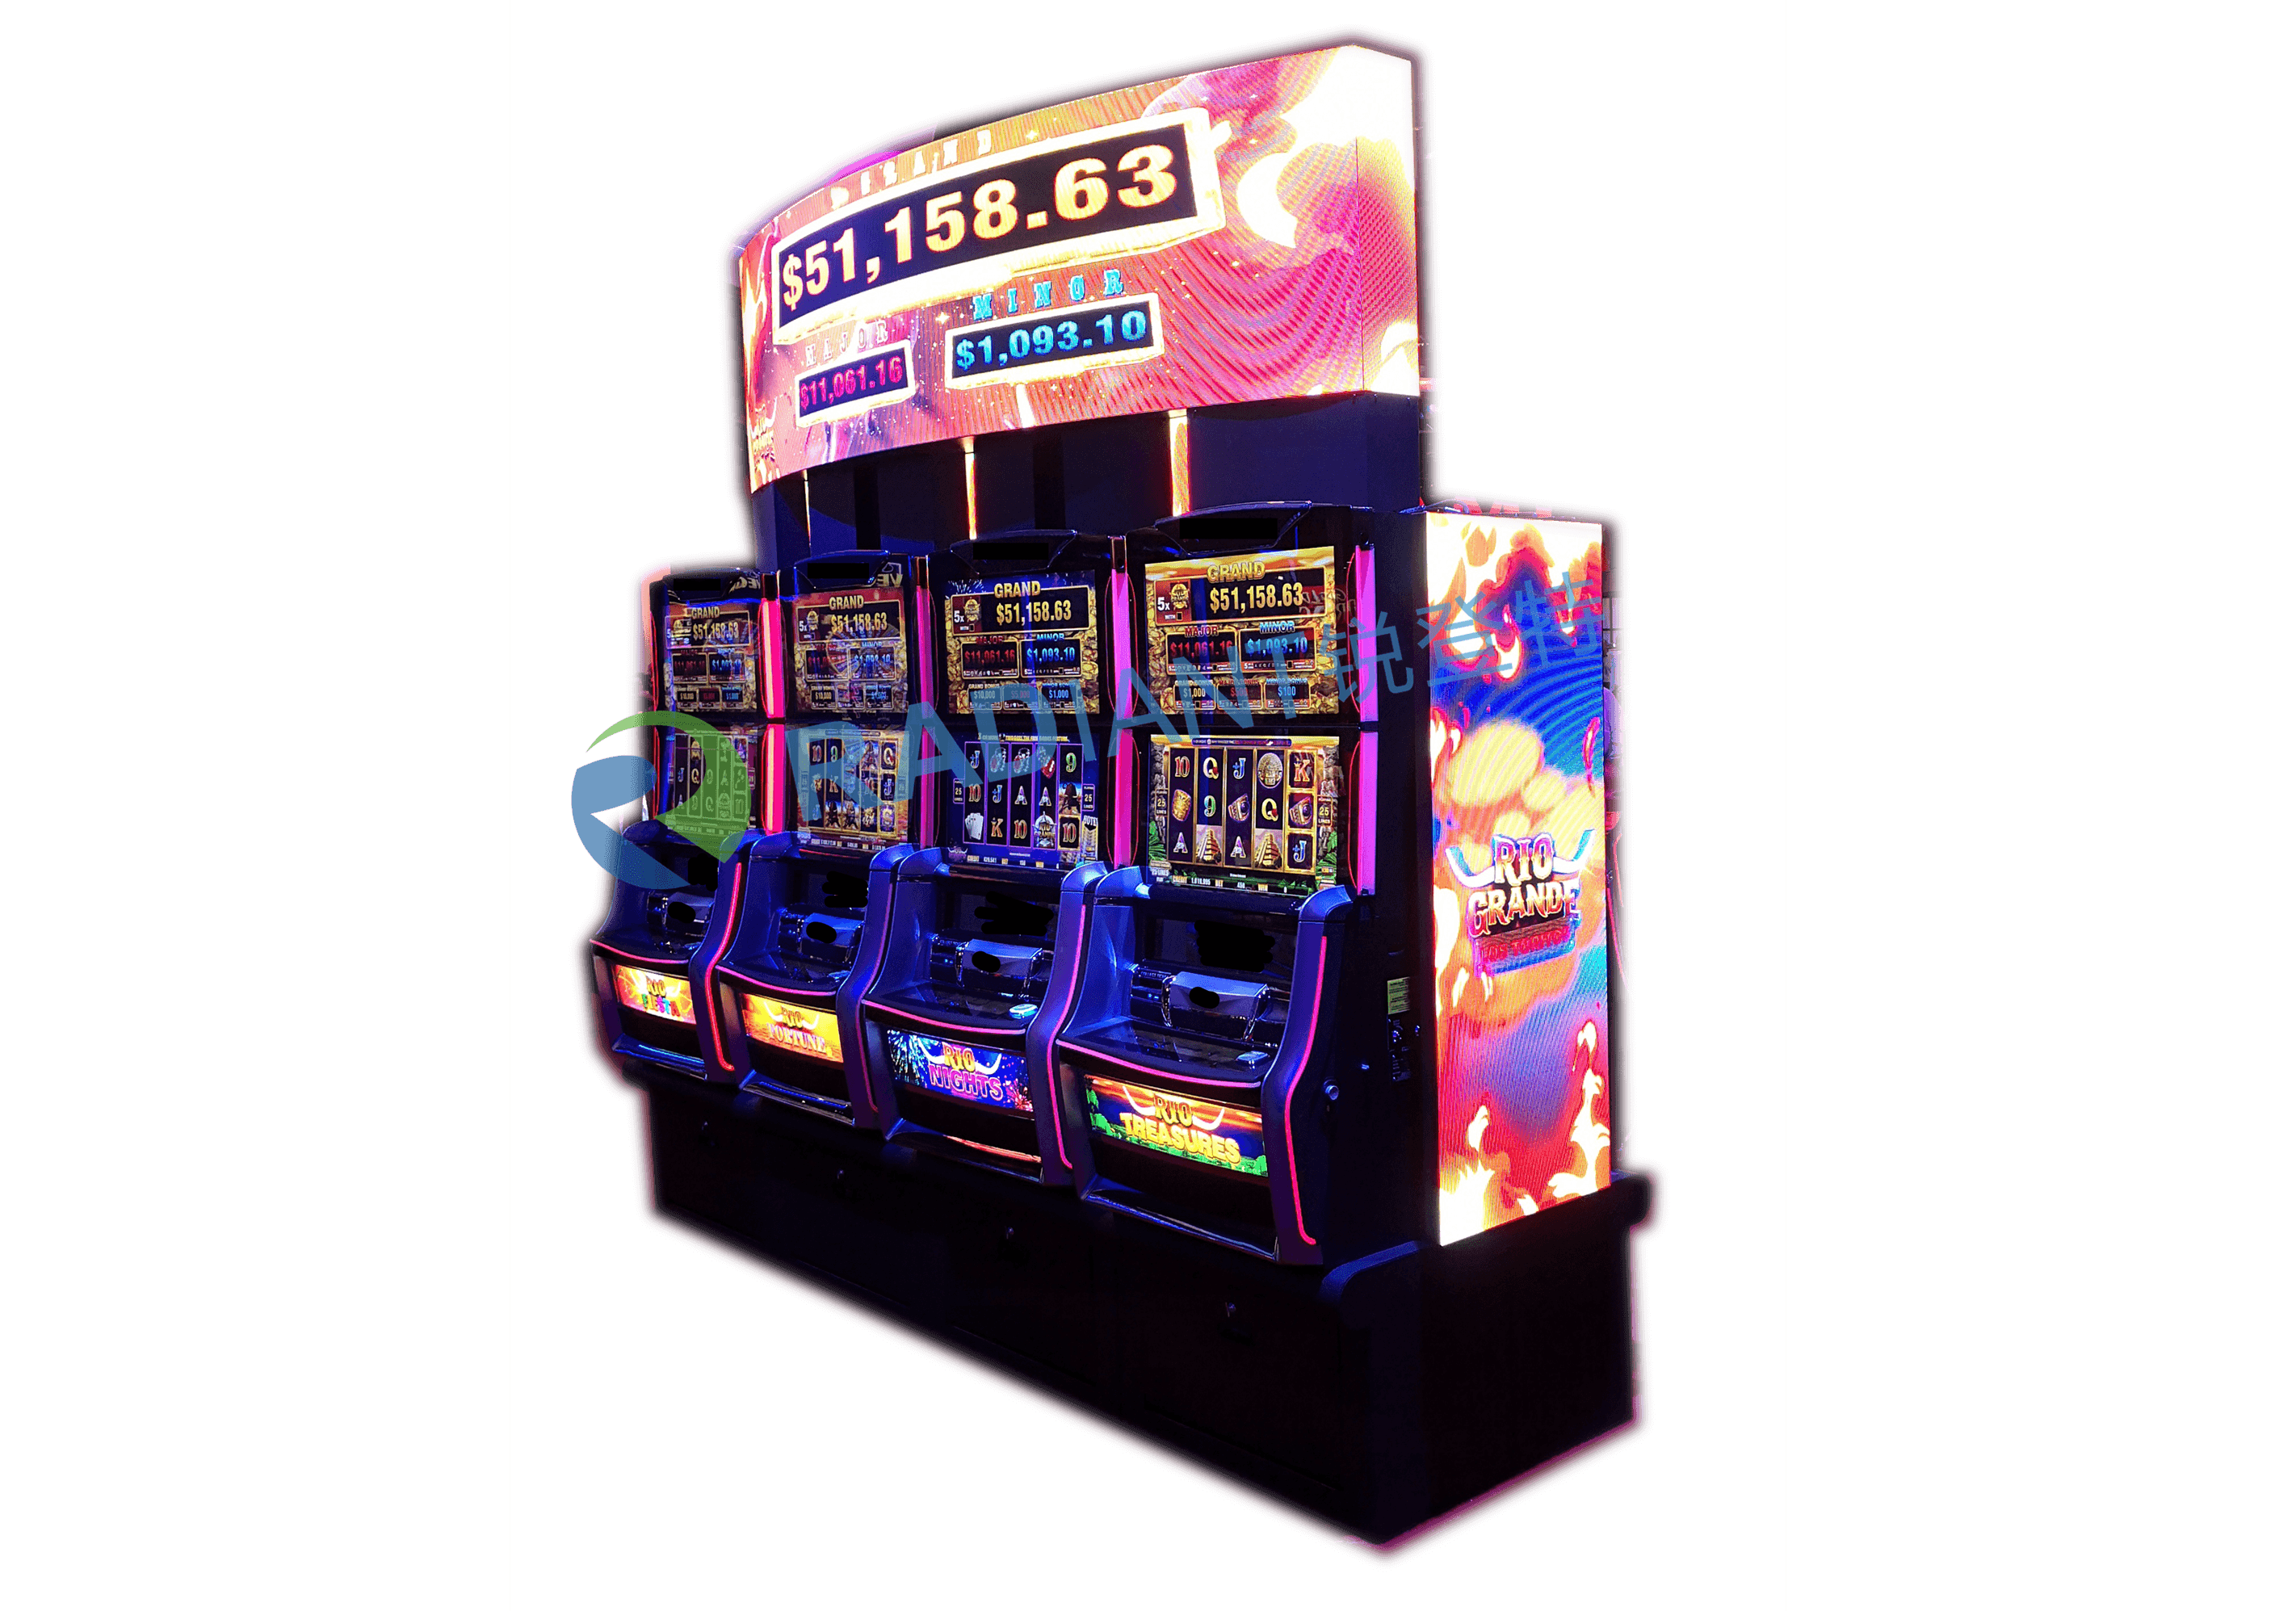 Ellipse LED Display for Slot Machine Gaming led sign in Casino Gambling facilities